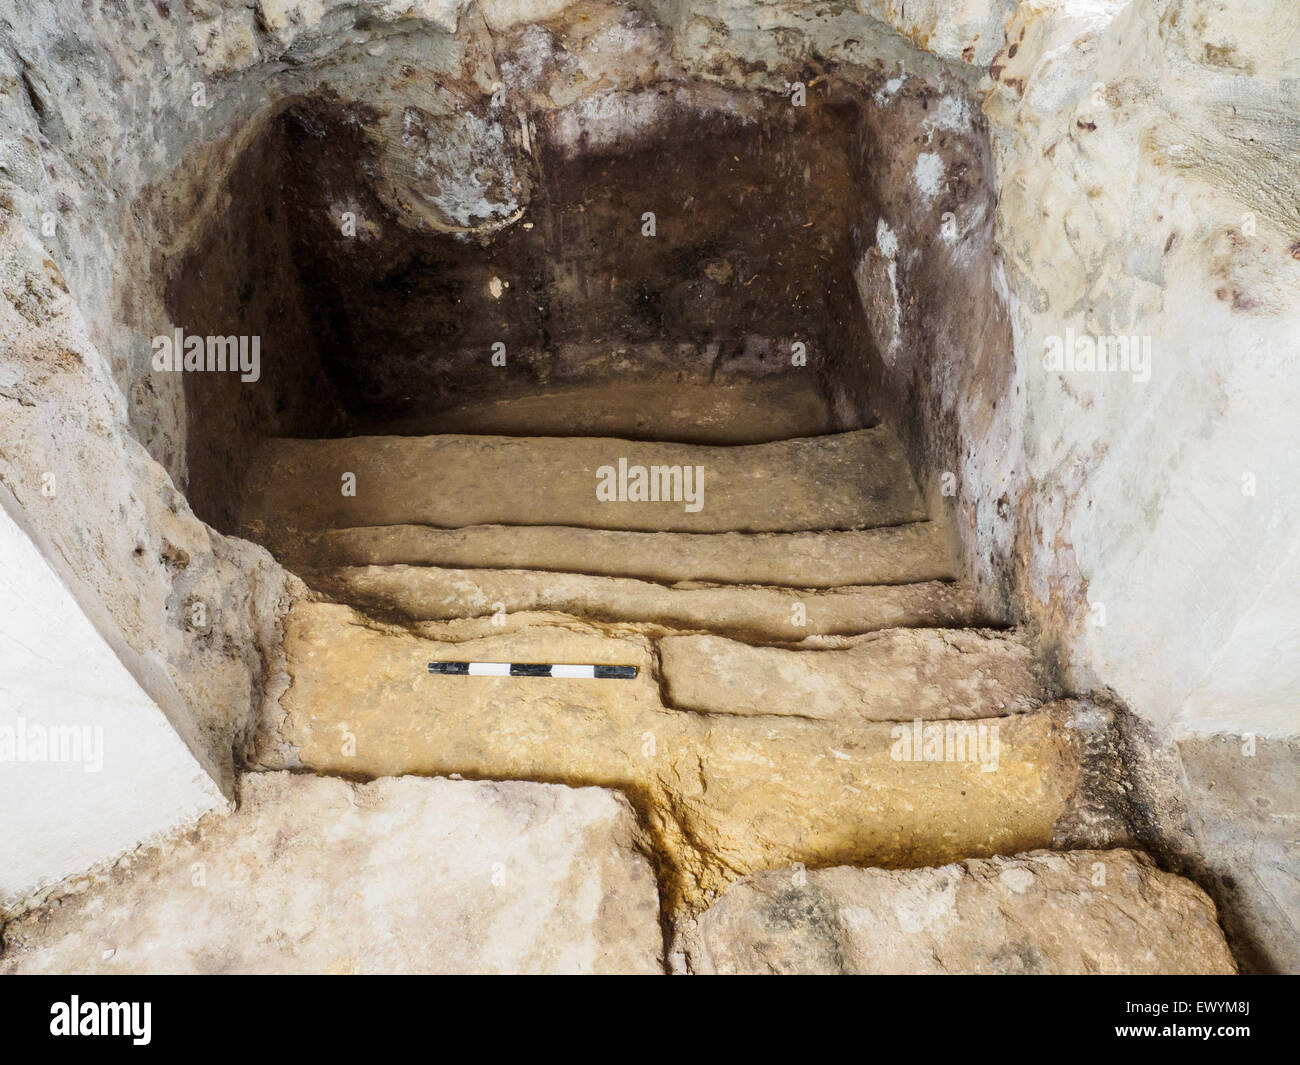 (150702) -- JERUSALEM, July 2, 2015 (Xinhua) -- The undated photo released by the Israel Antiquities Authority shows an ancient Jewish ritual bath that was discovered under a living room of a private house near Jerusalem. A 2000-year old ritual bath was discovered near Jerusalem under a living room of a private house, the Israeli Antiquities Authority said in a statement on Wednesday. The ancient ritual bath, known in Hebrew as a mikve, was discovered amid renovations of a private home in Ein Karem, a village near Jerusalem, and believed to have originated from the period of the Second Temple, Stock Photo